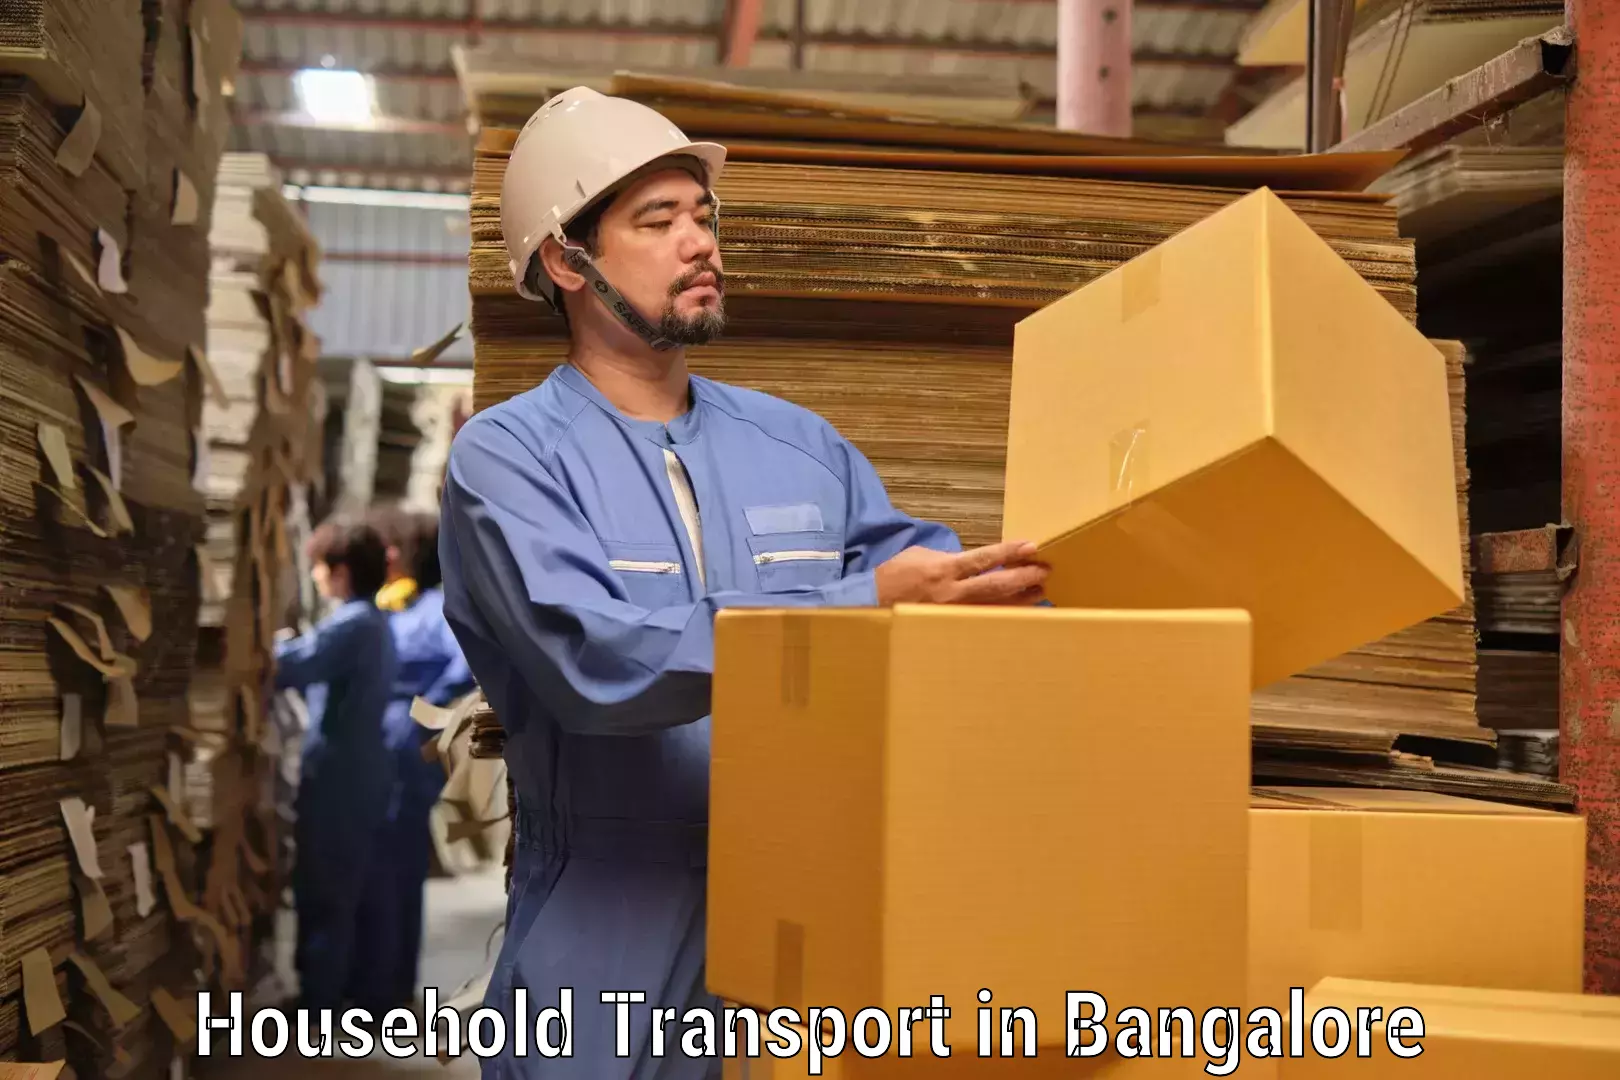 Furniture moving and handling in Bangalore